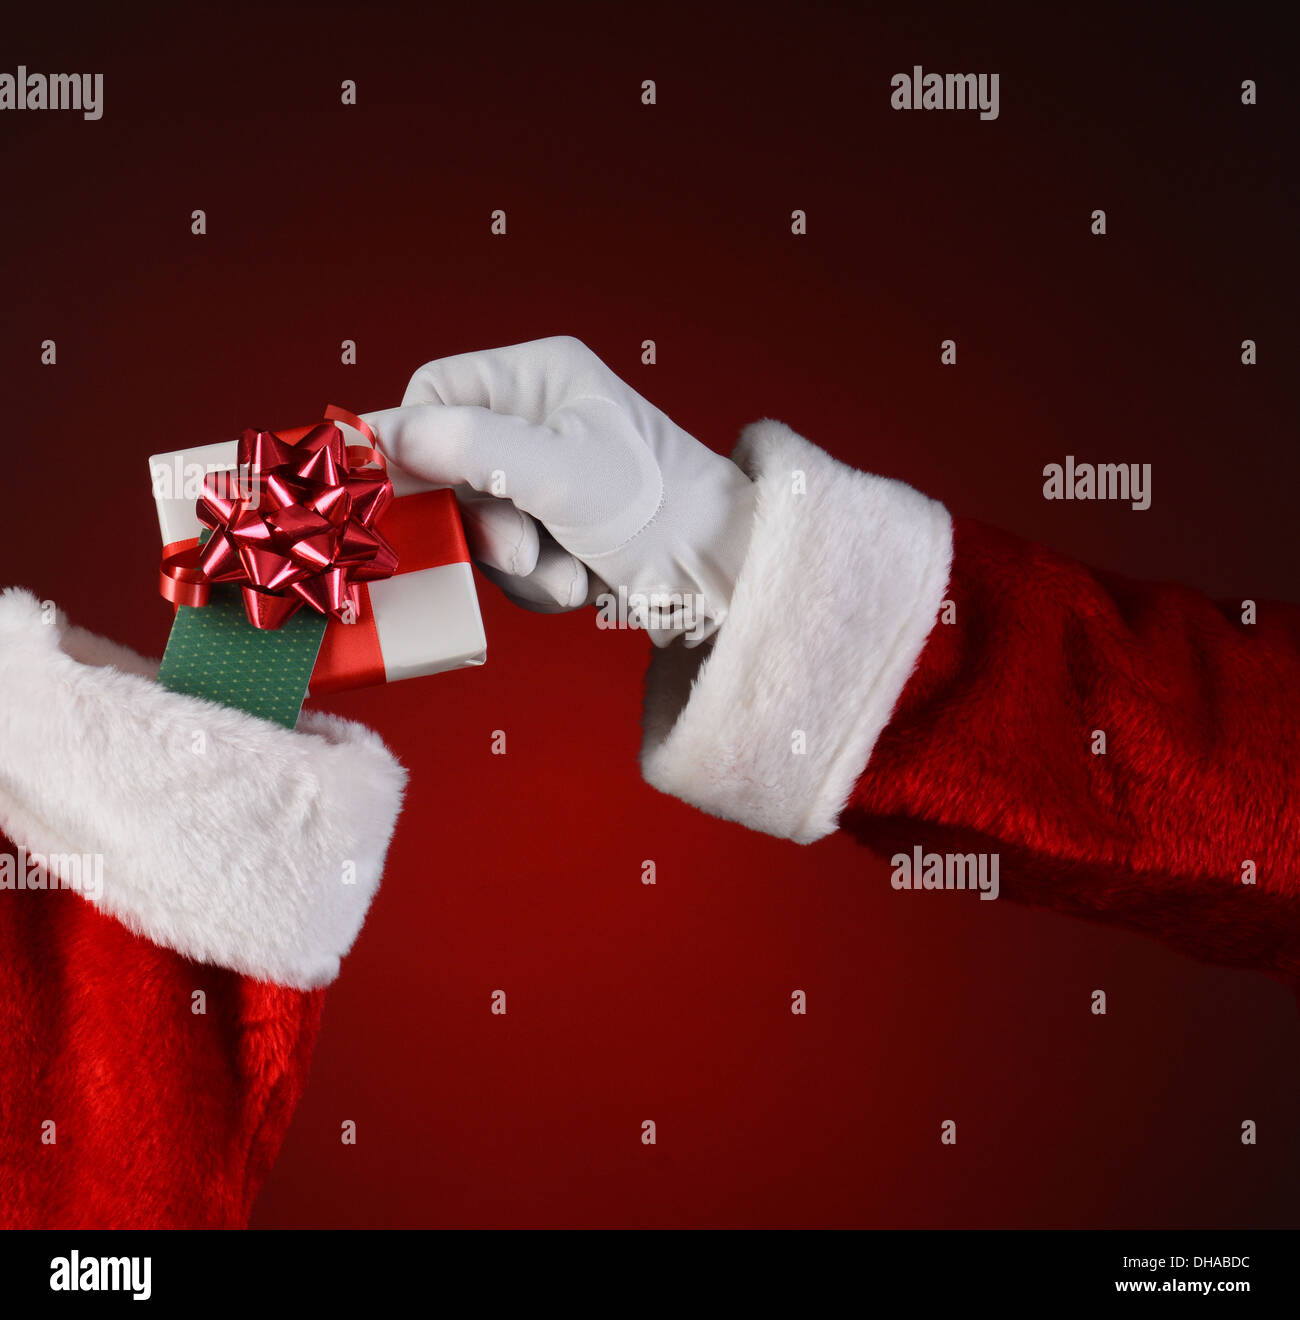 Closeup of Santa Claus placing a small wrapped present into a holiday stocking. Stock Photo